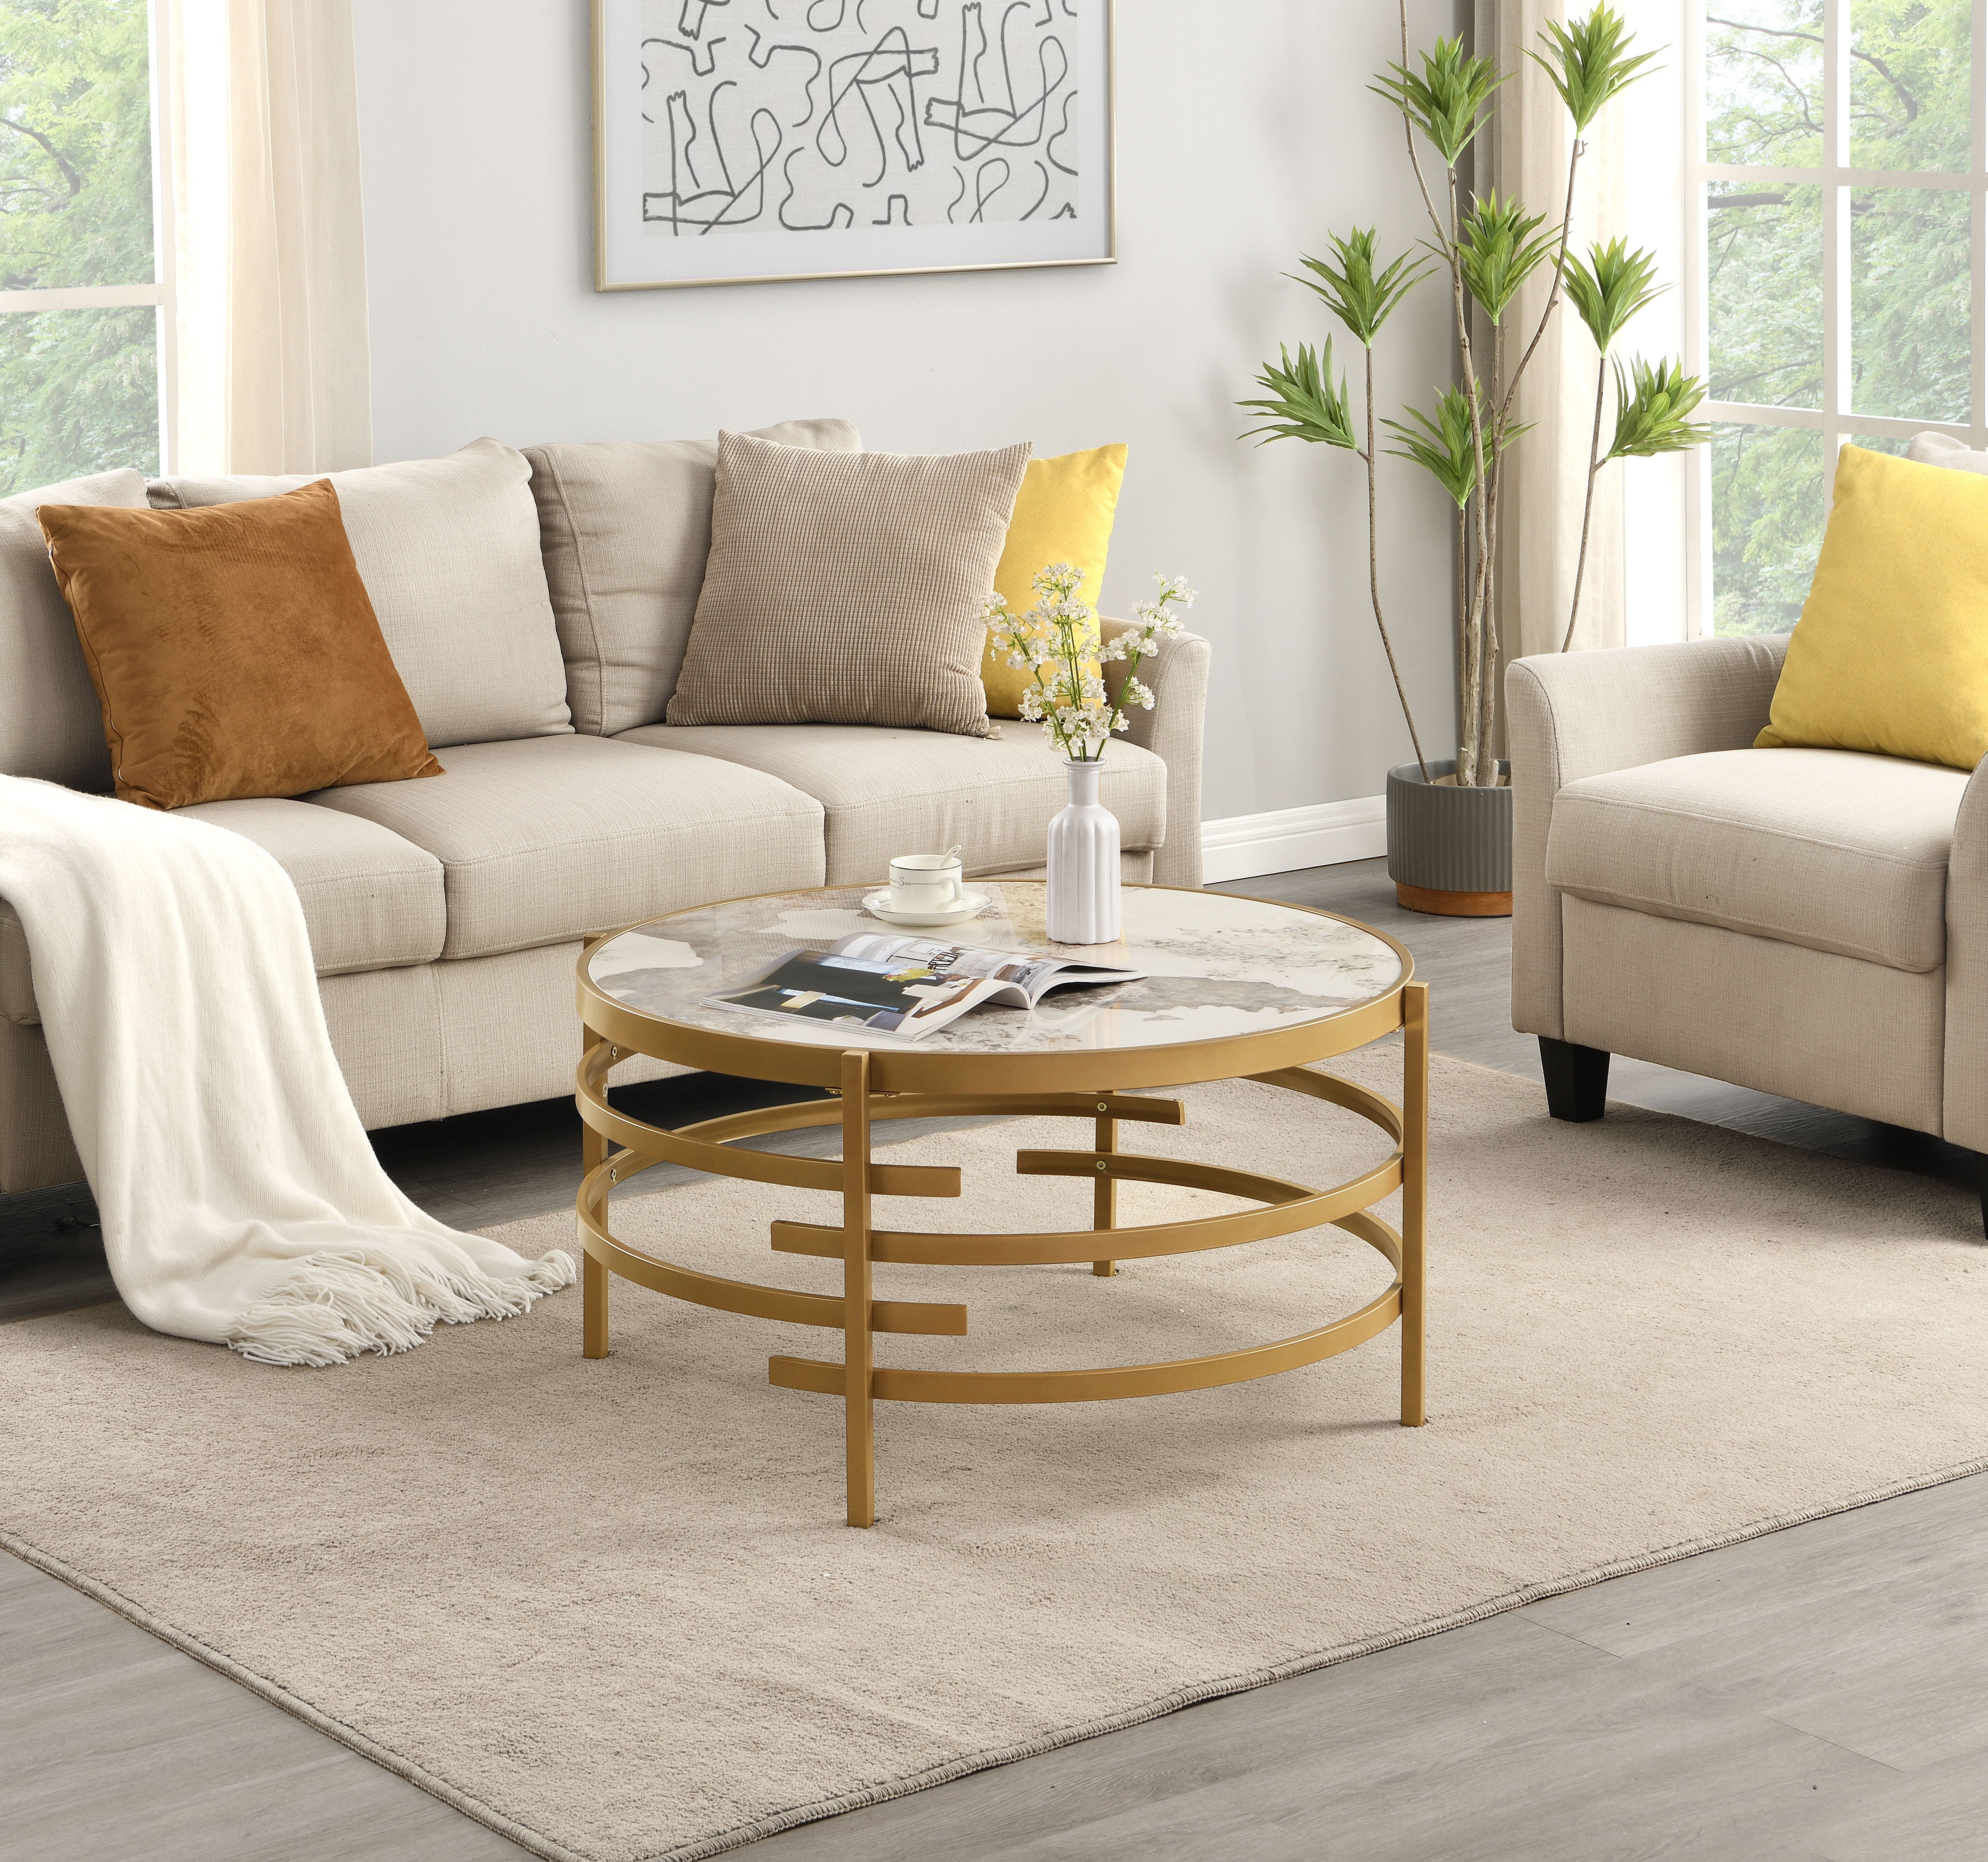 32.48'' Round Coffee Table With Sintered Stone Top&Sturdy Metal Frame, Modern Coffee Table For Living Room - Golden